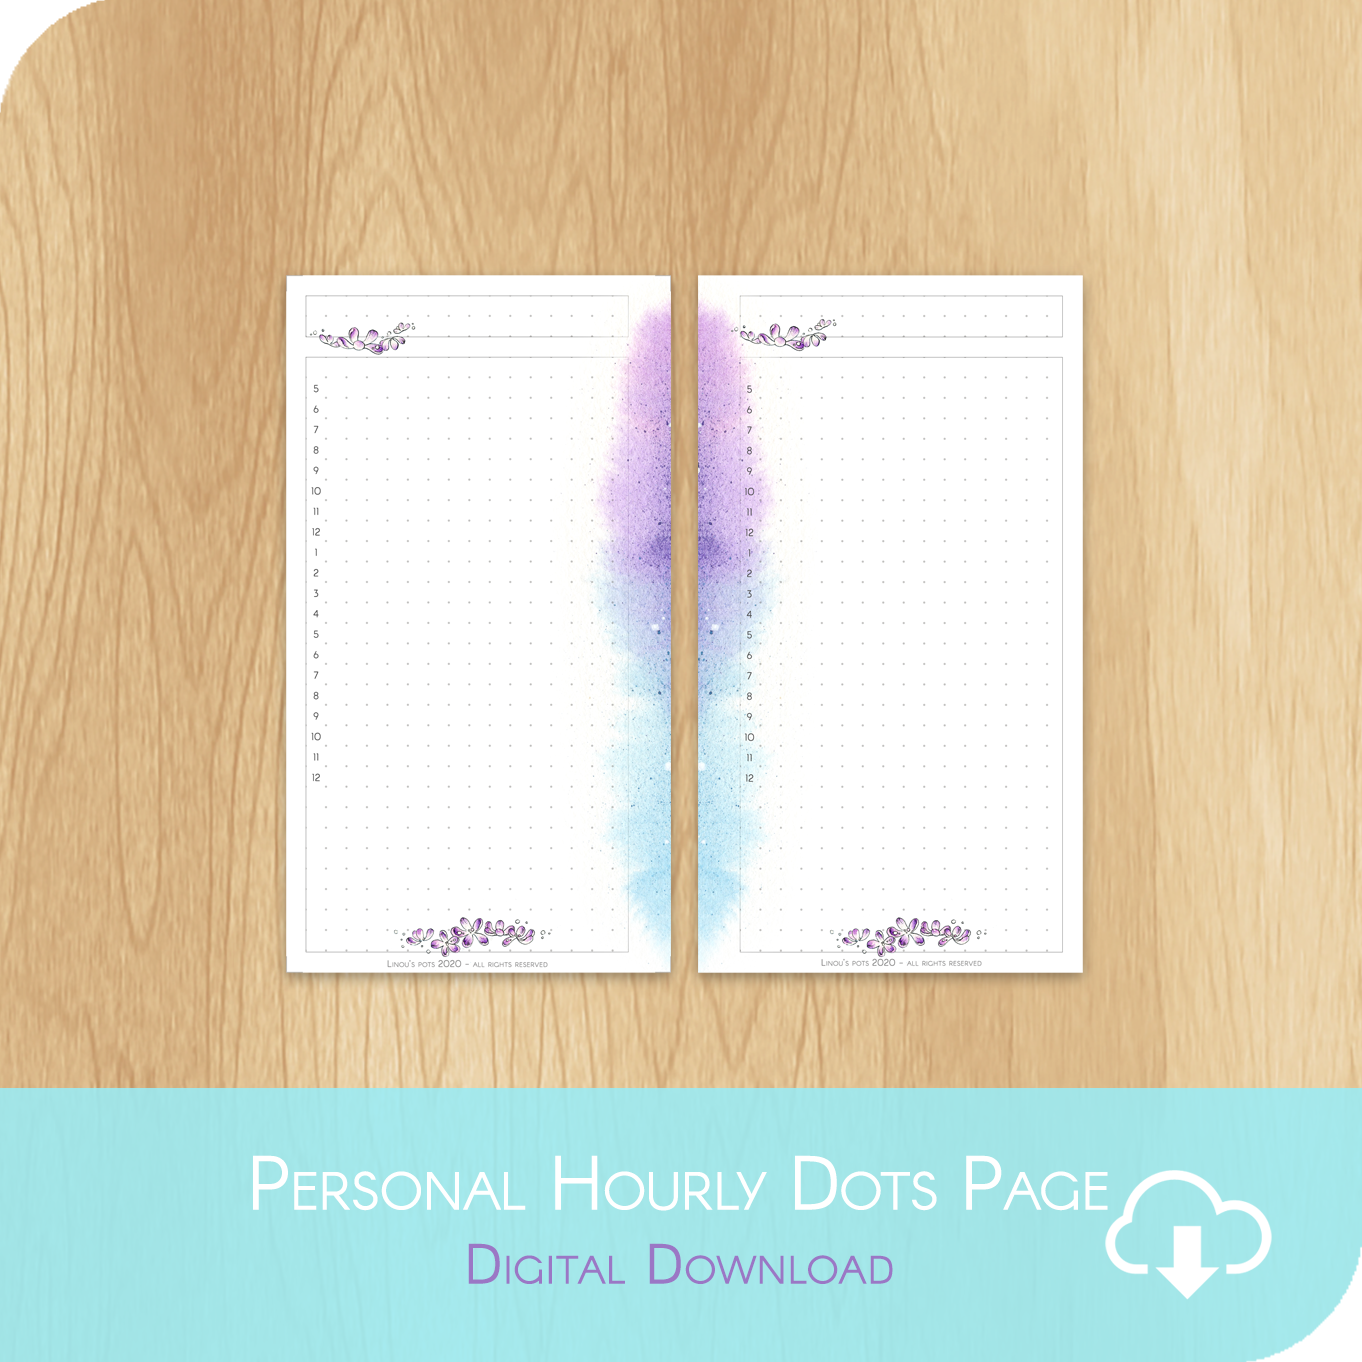 Buzzing In The Rain - Printable PERSONAL Hourly Dots Page - White Version